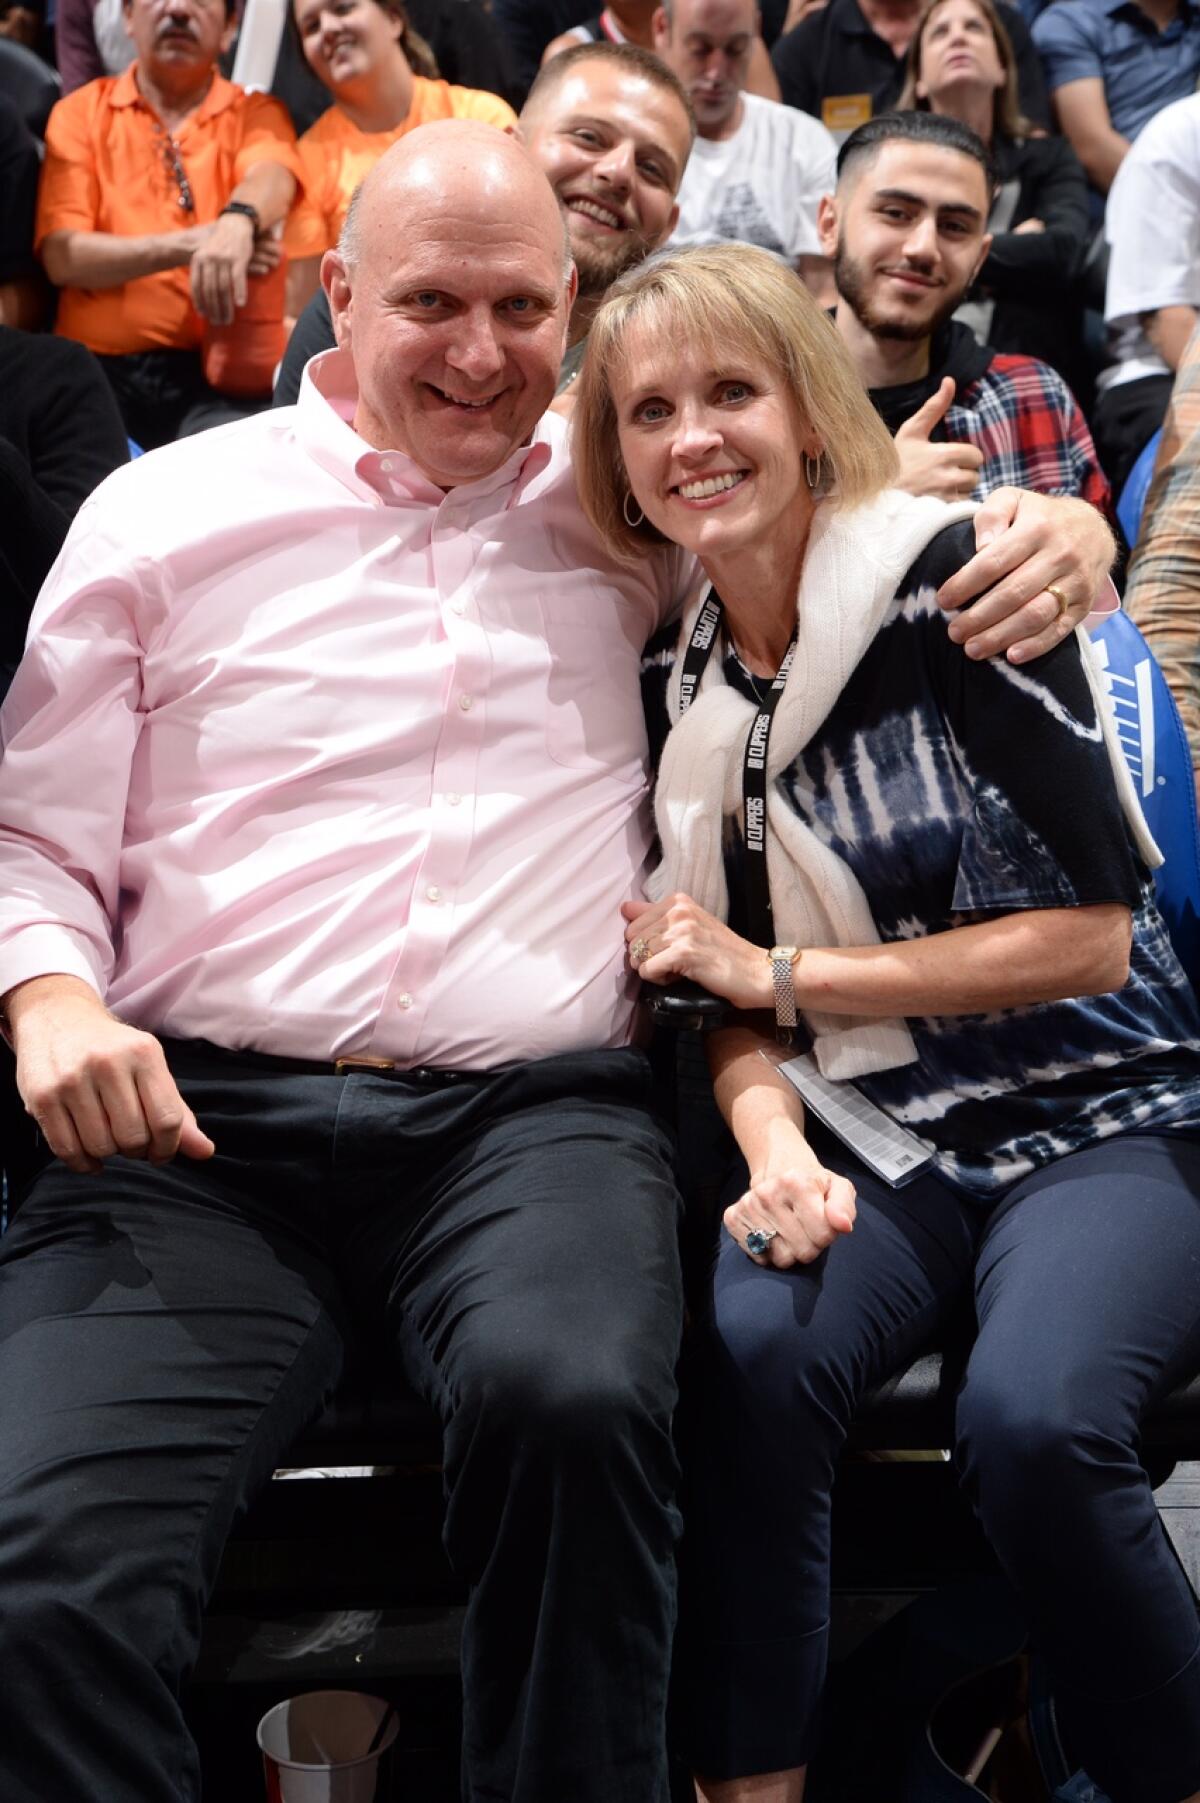 Steve and Connie Ballmer pose for a photo at their Staples Center courtside seats.